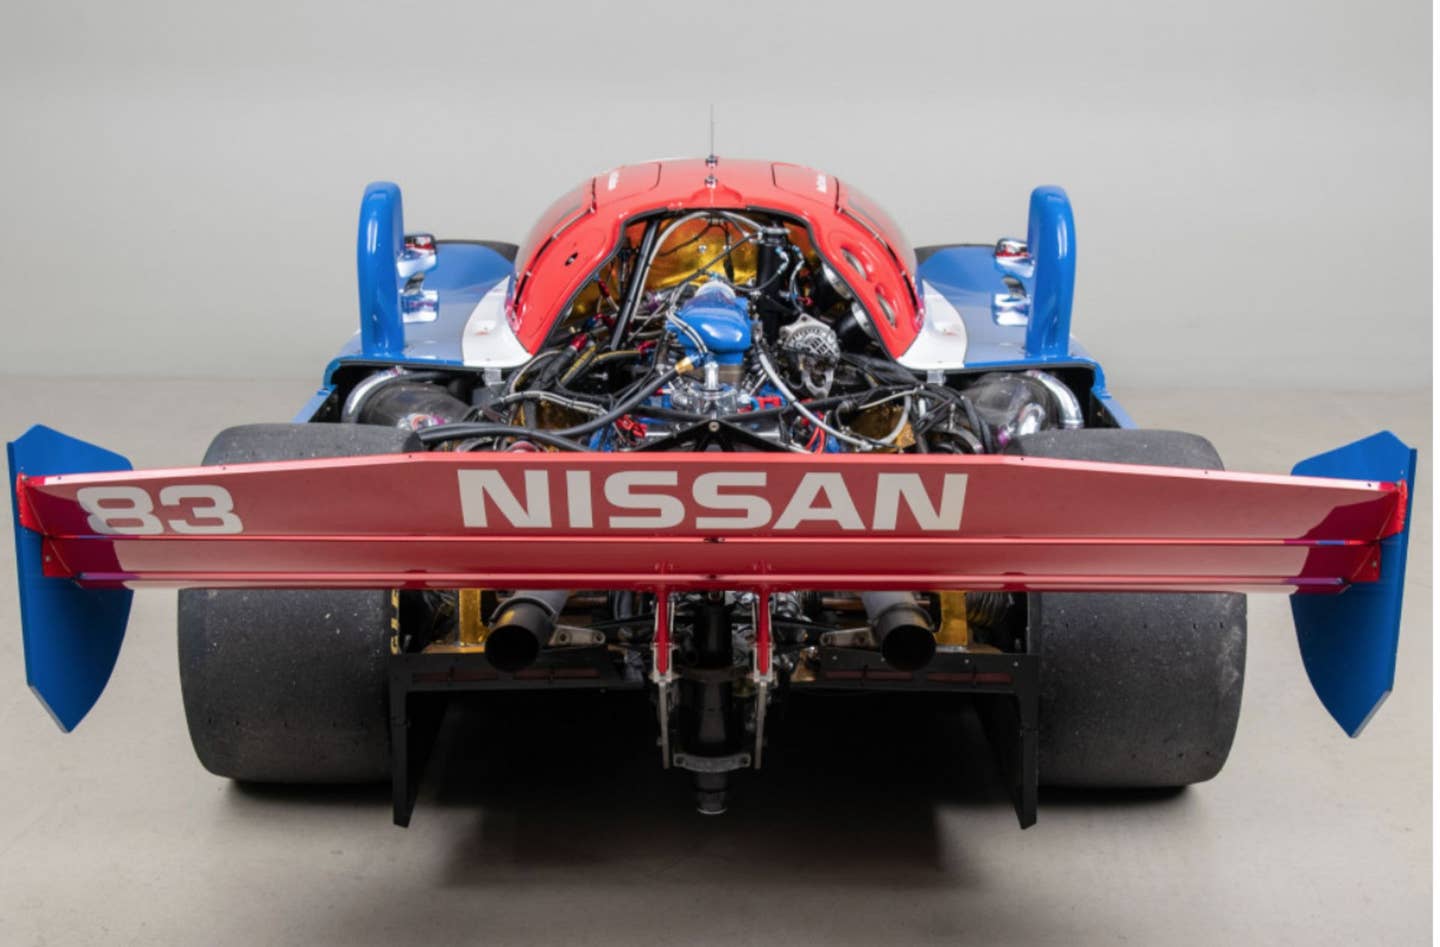 message-editor%2F1602037263814-nissan-1990-npt-90-rear-view-with-engine-visible.jpg